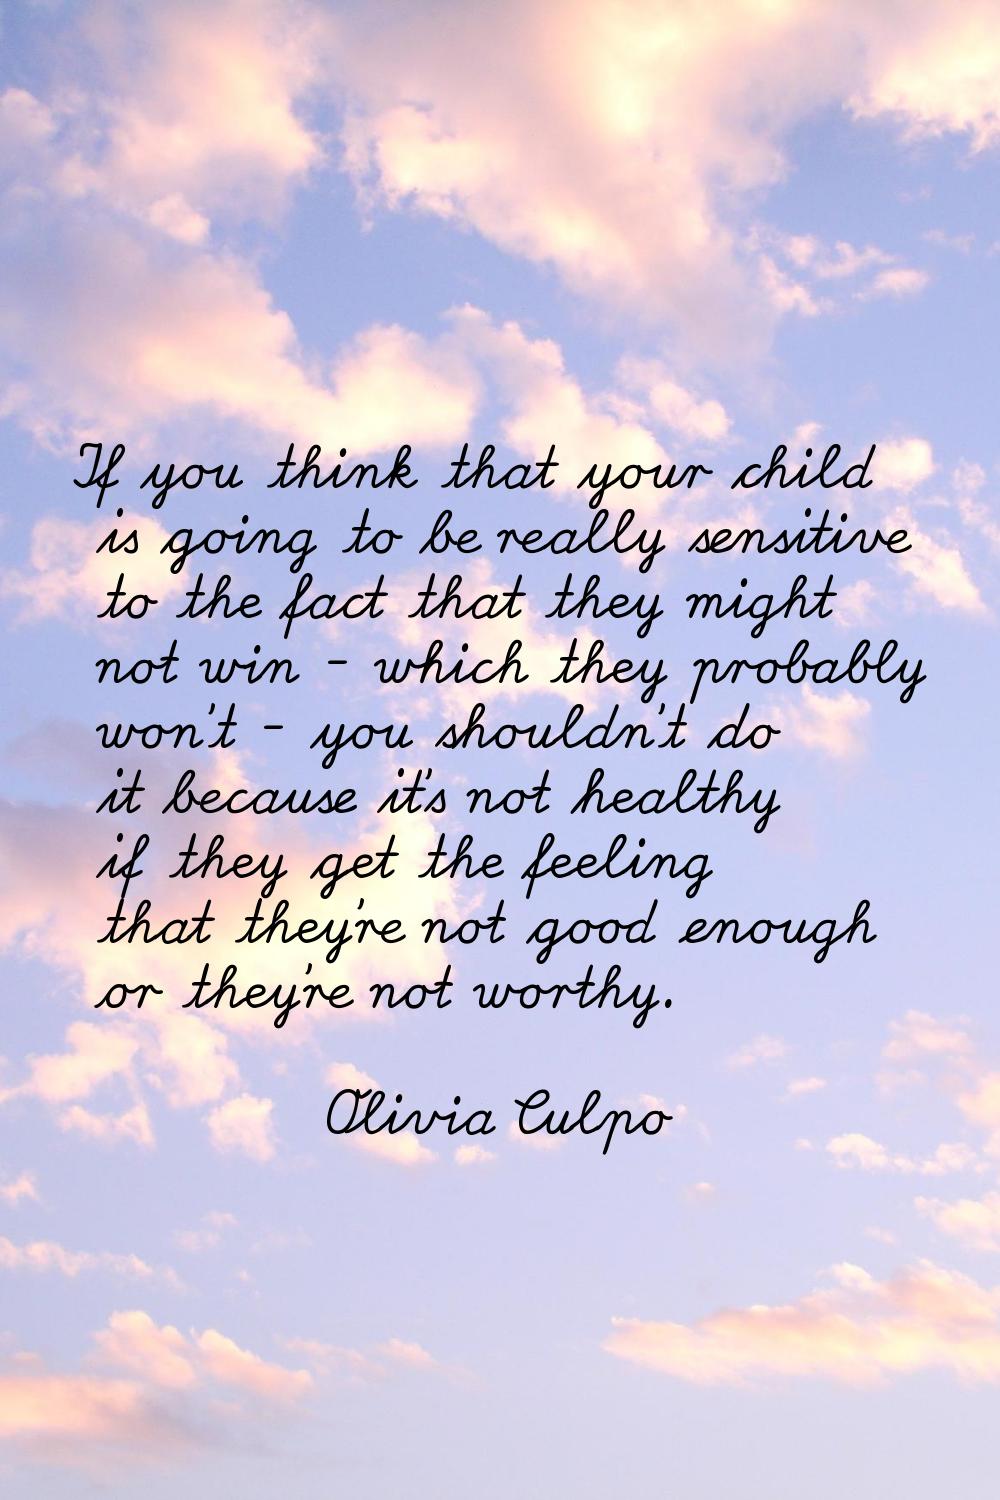 If you think that your child is going to be really sensitive to the fact that they might not win - 